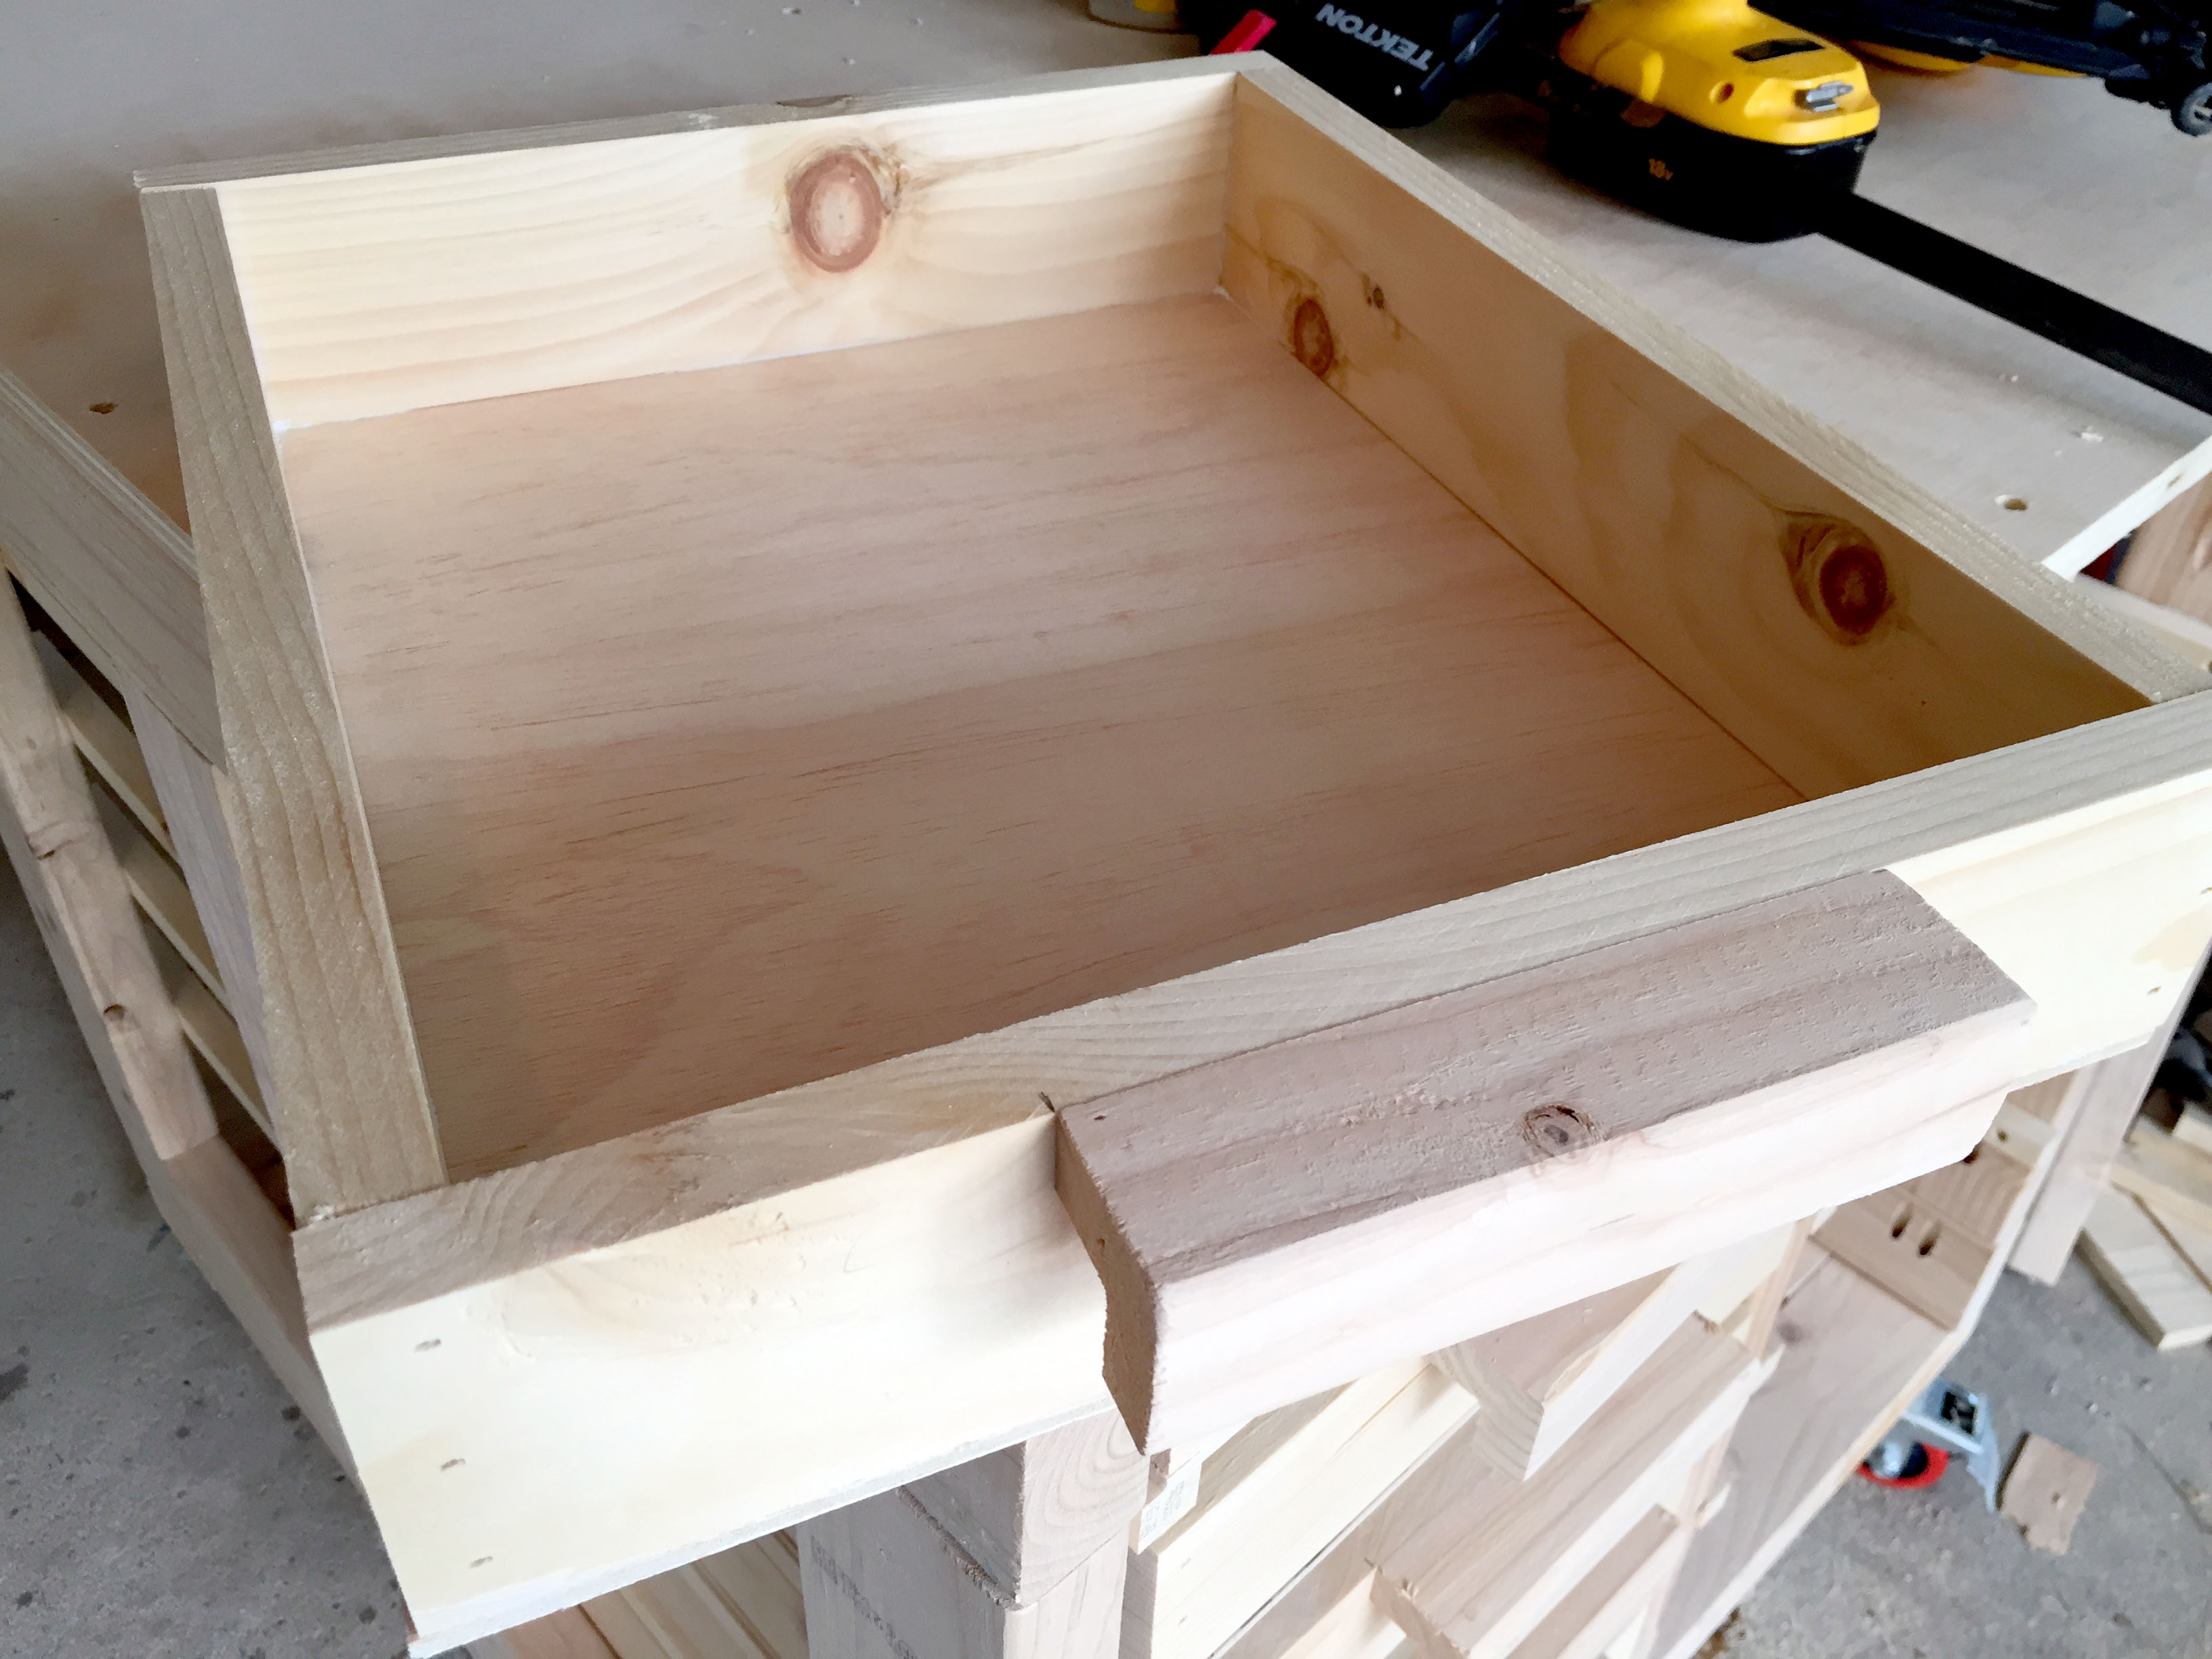 How To Make Diy Drawers With Homemade Handles